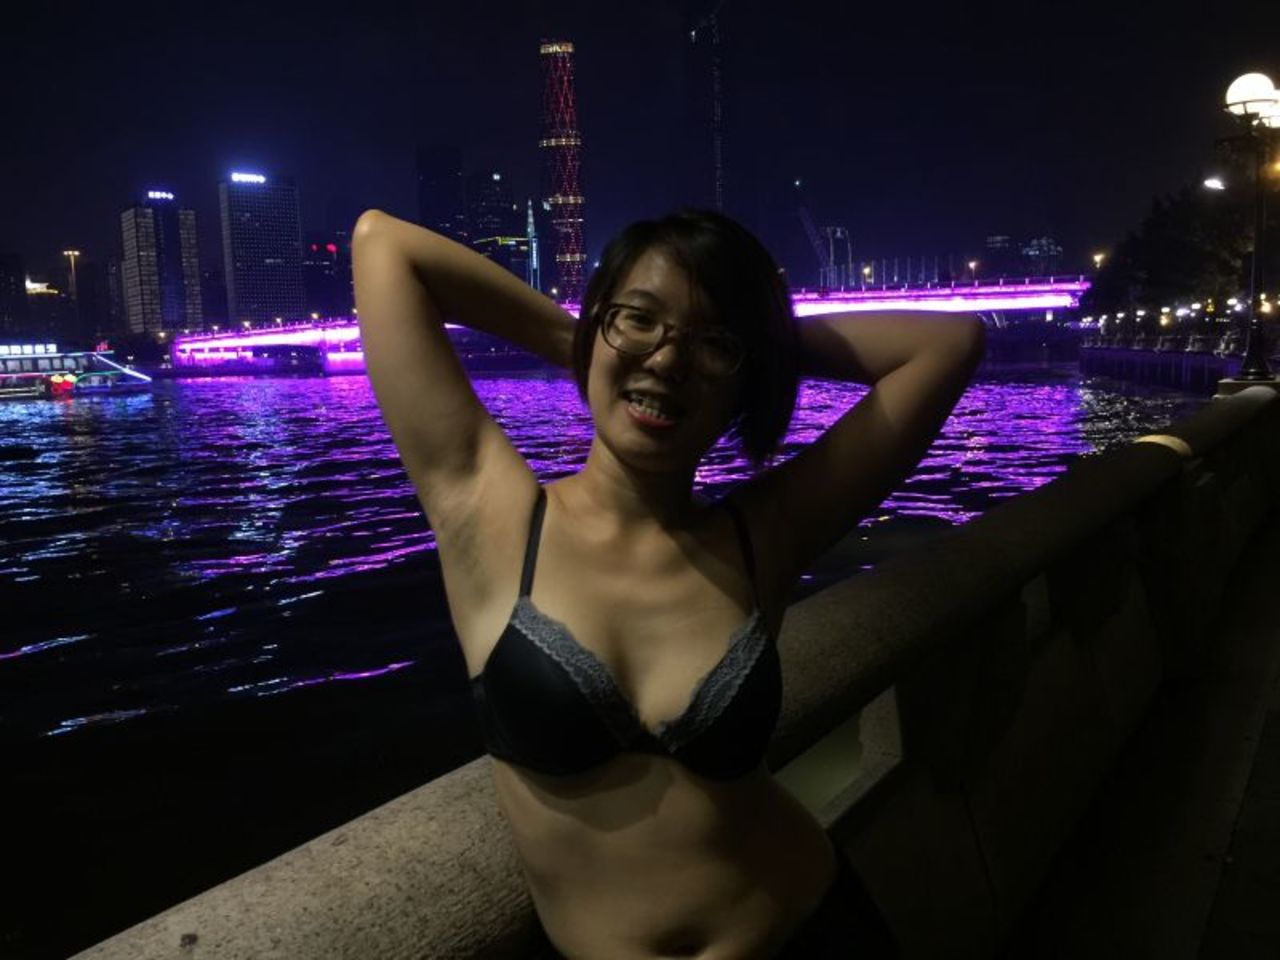 Wei Tingting, who was also arrested in March, joined her friends, showing off underarm hair along the Zhujiang River in Guangzhou.